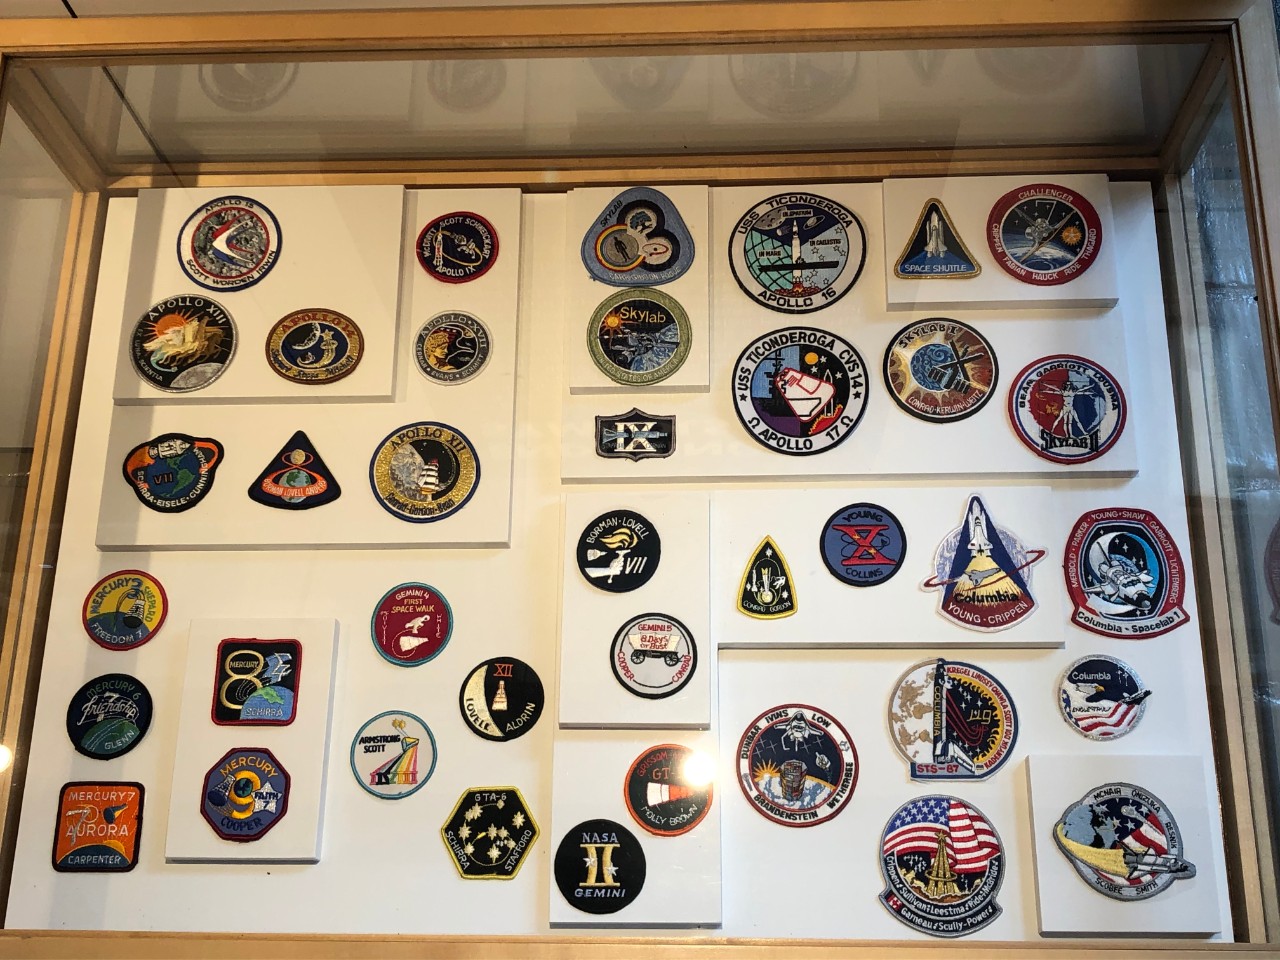 NMUSN_Fly Navy_NASA Related Patches: NMUSN L2019-06-A-B and NMUSN L2019-07-A